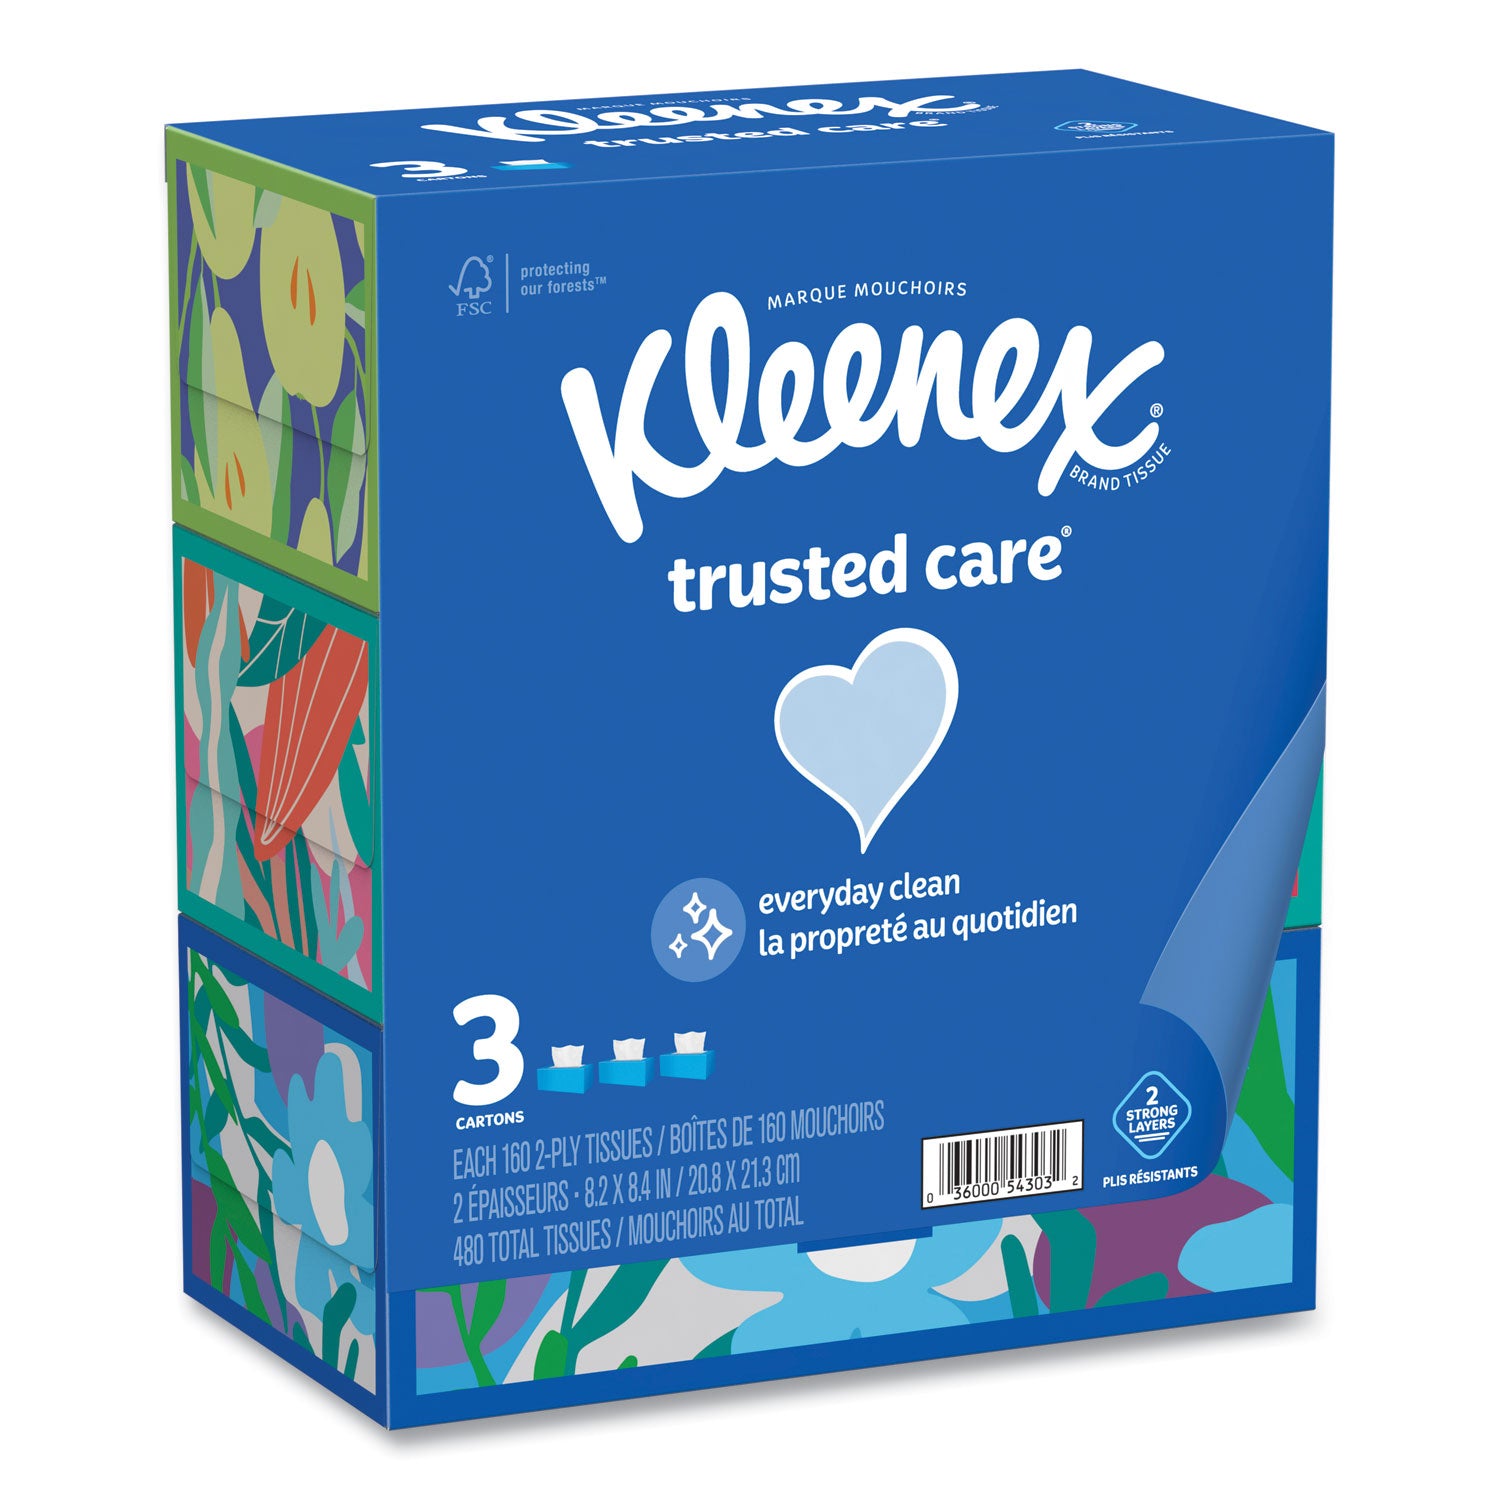 trusted-care-facial-tissue-2-ply-white-160-sheets-box-3-boxes-pack-12-packs-carton_kcc54303 - 1